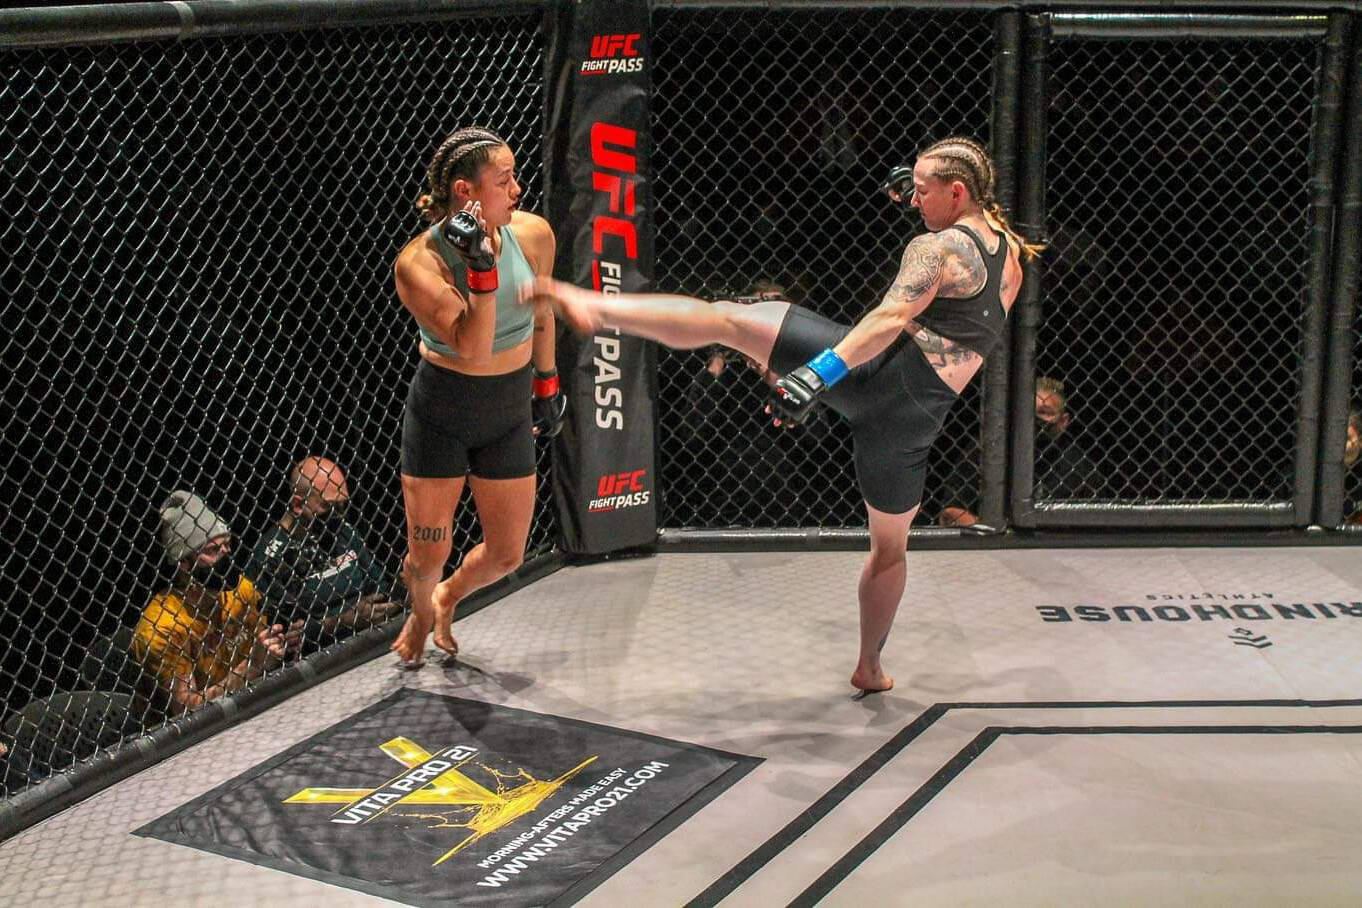 Rylie Marchand (left) of Vernon's Unity MMA and Kickboxing gym won by unanimous decision in a fight versus Robyn Dunne at Battlefield Fight League 71 in Vancouver on March 10, 2022. (Submitted photo)